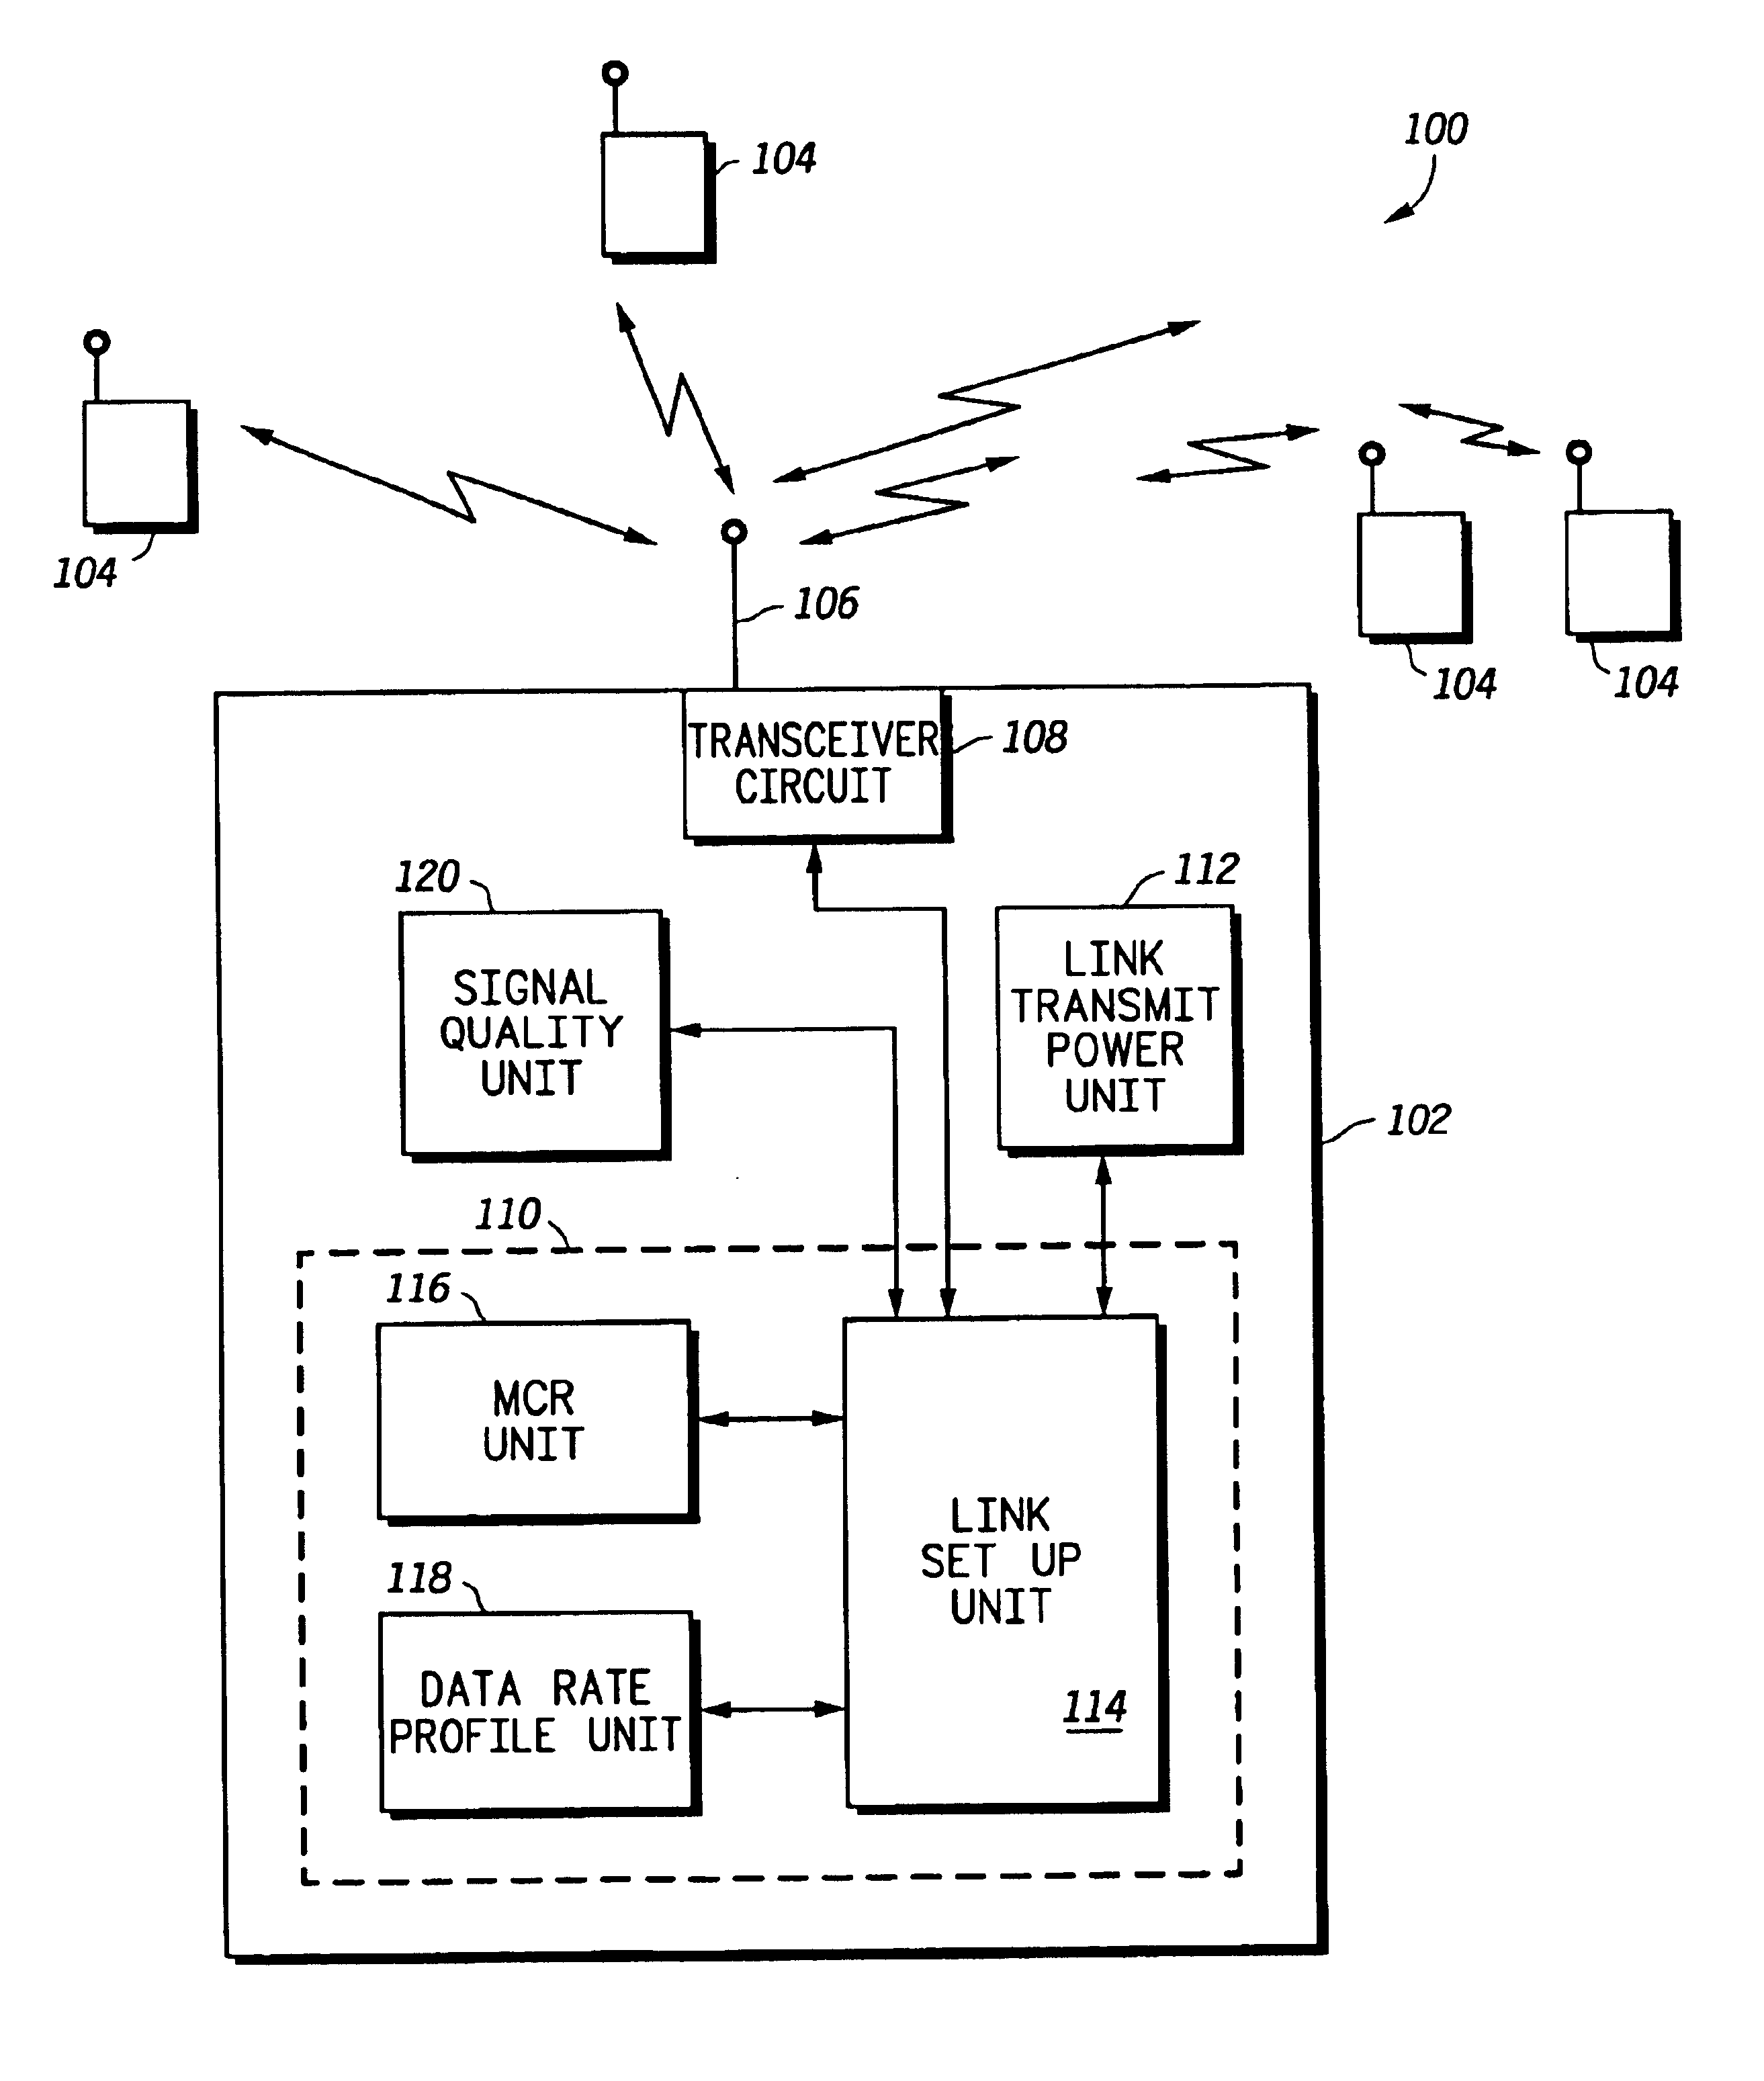 Method and system for excess resource distribution in a communication system